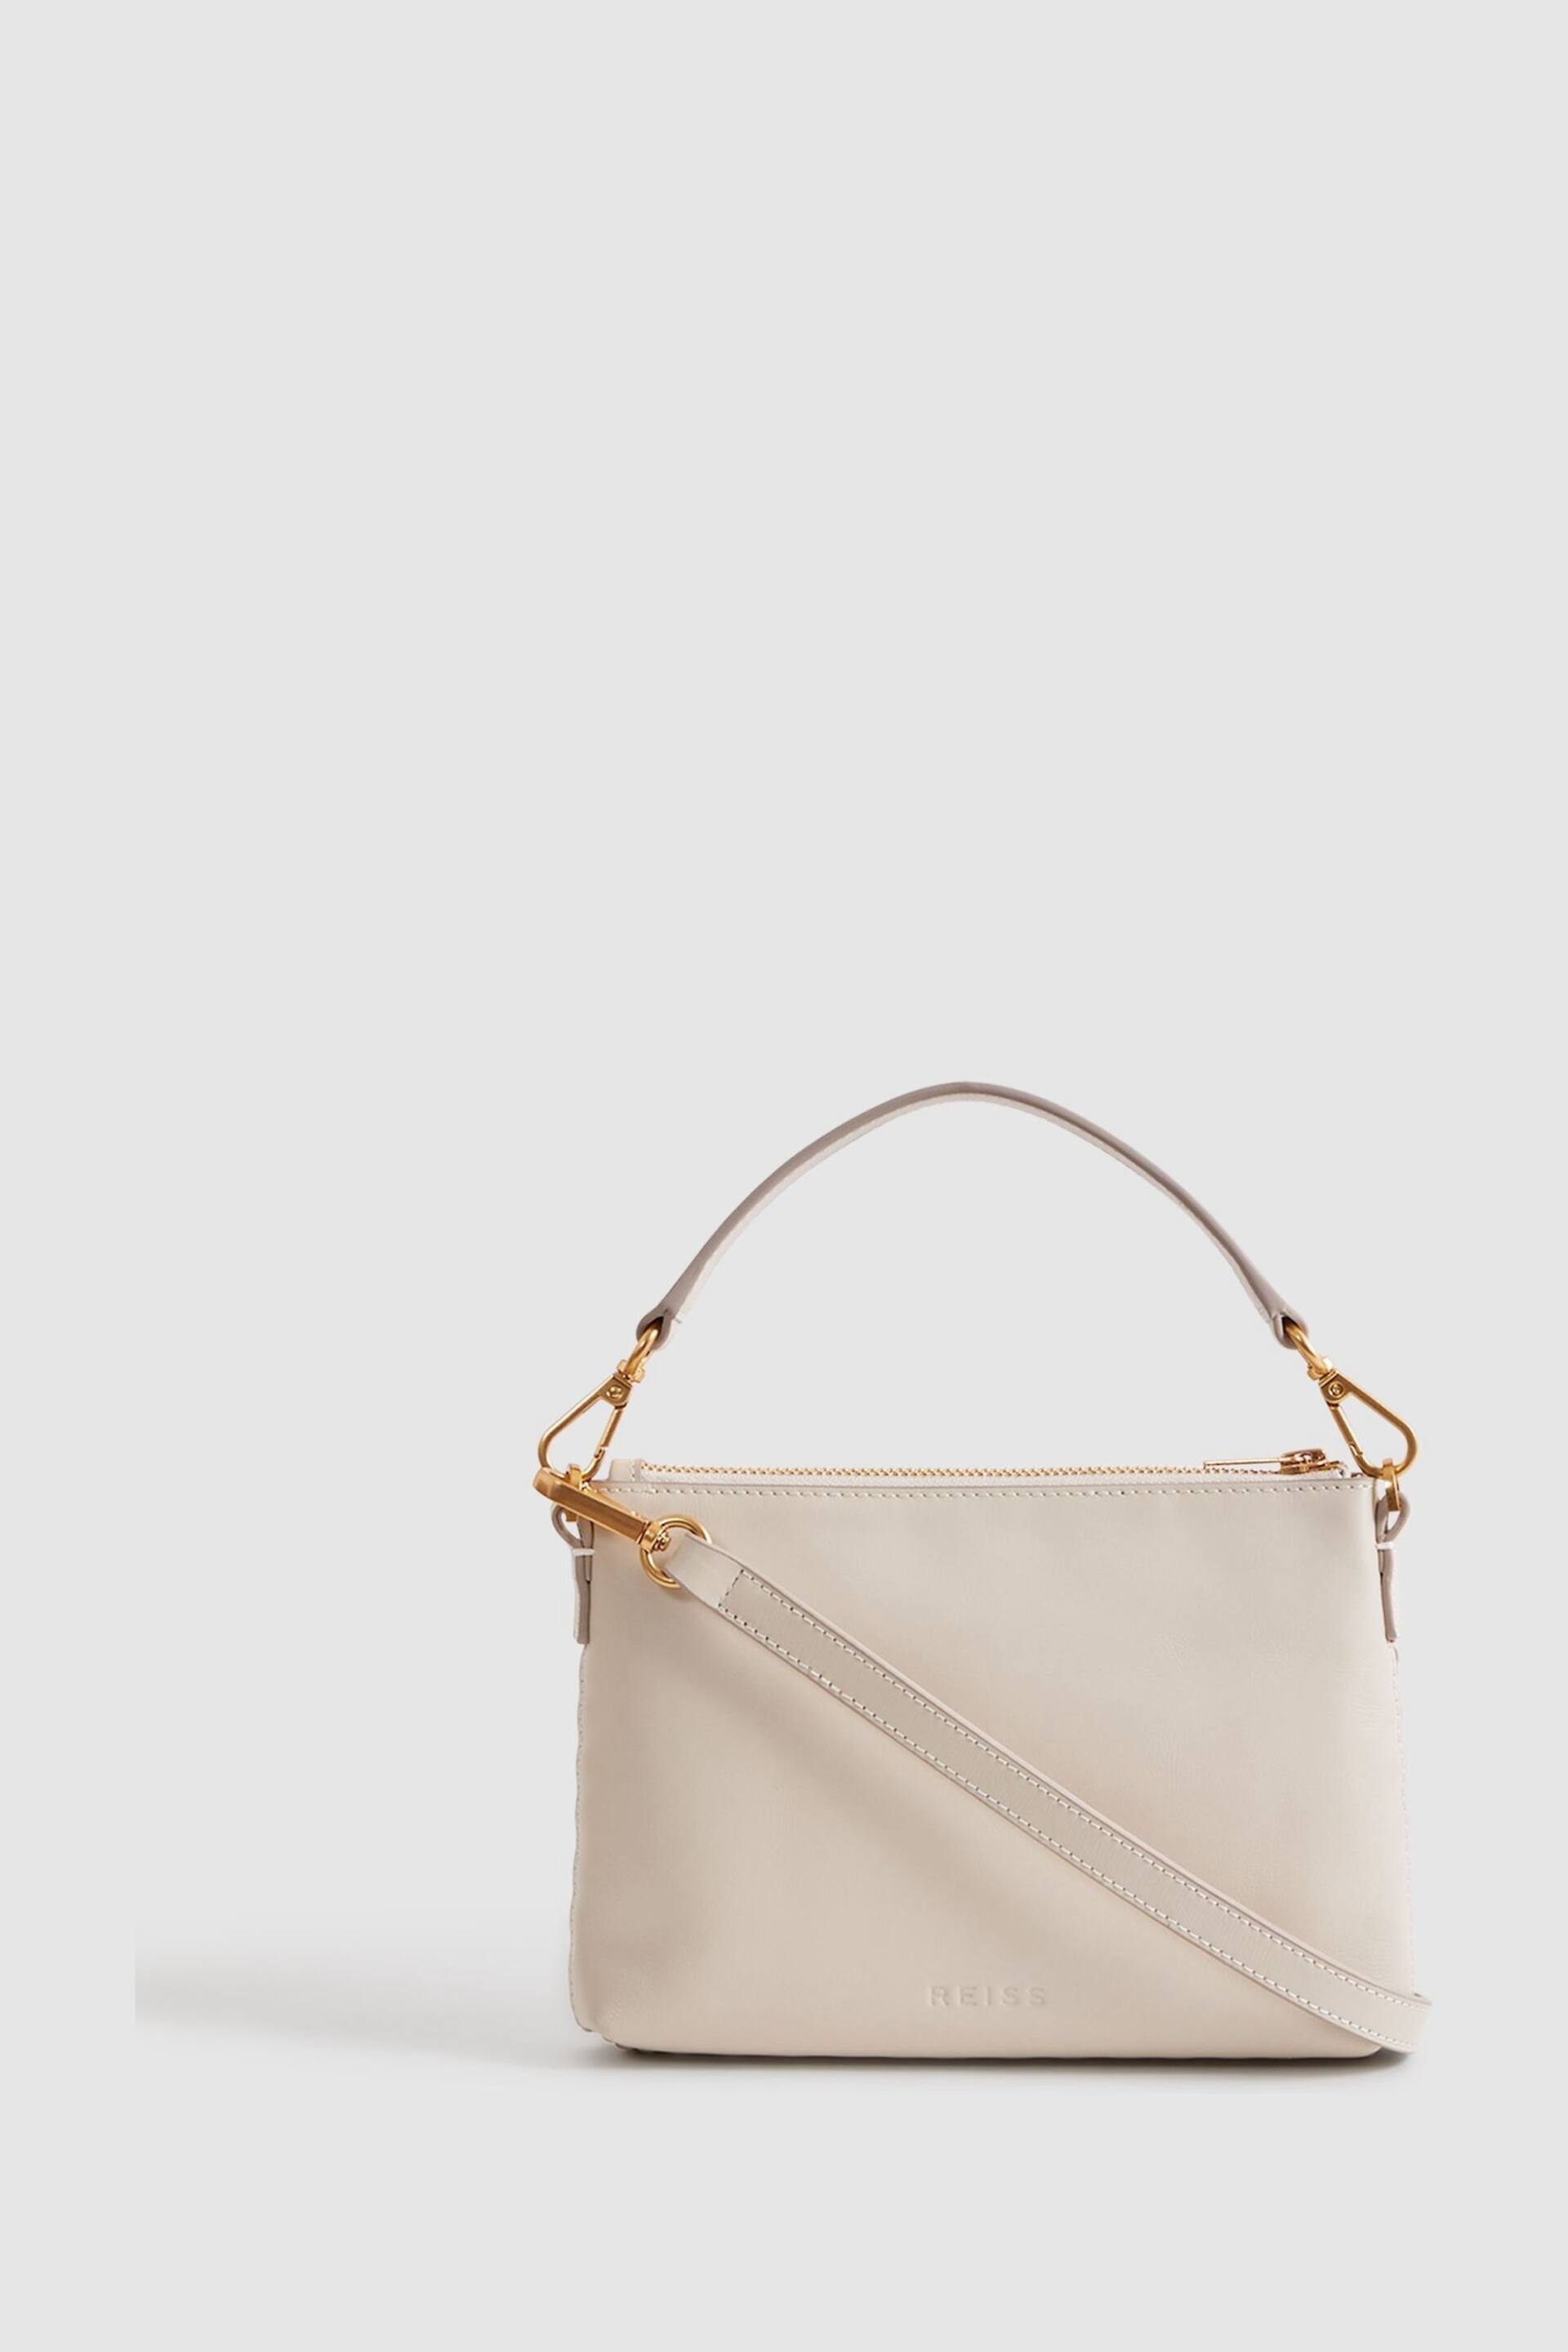 Reiss Off White Brompton Leather Raffia Pouch Bag - Image 3 of 5